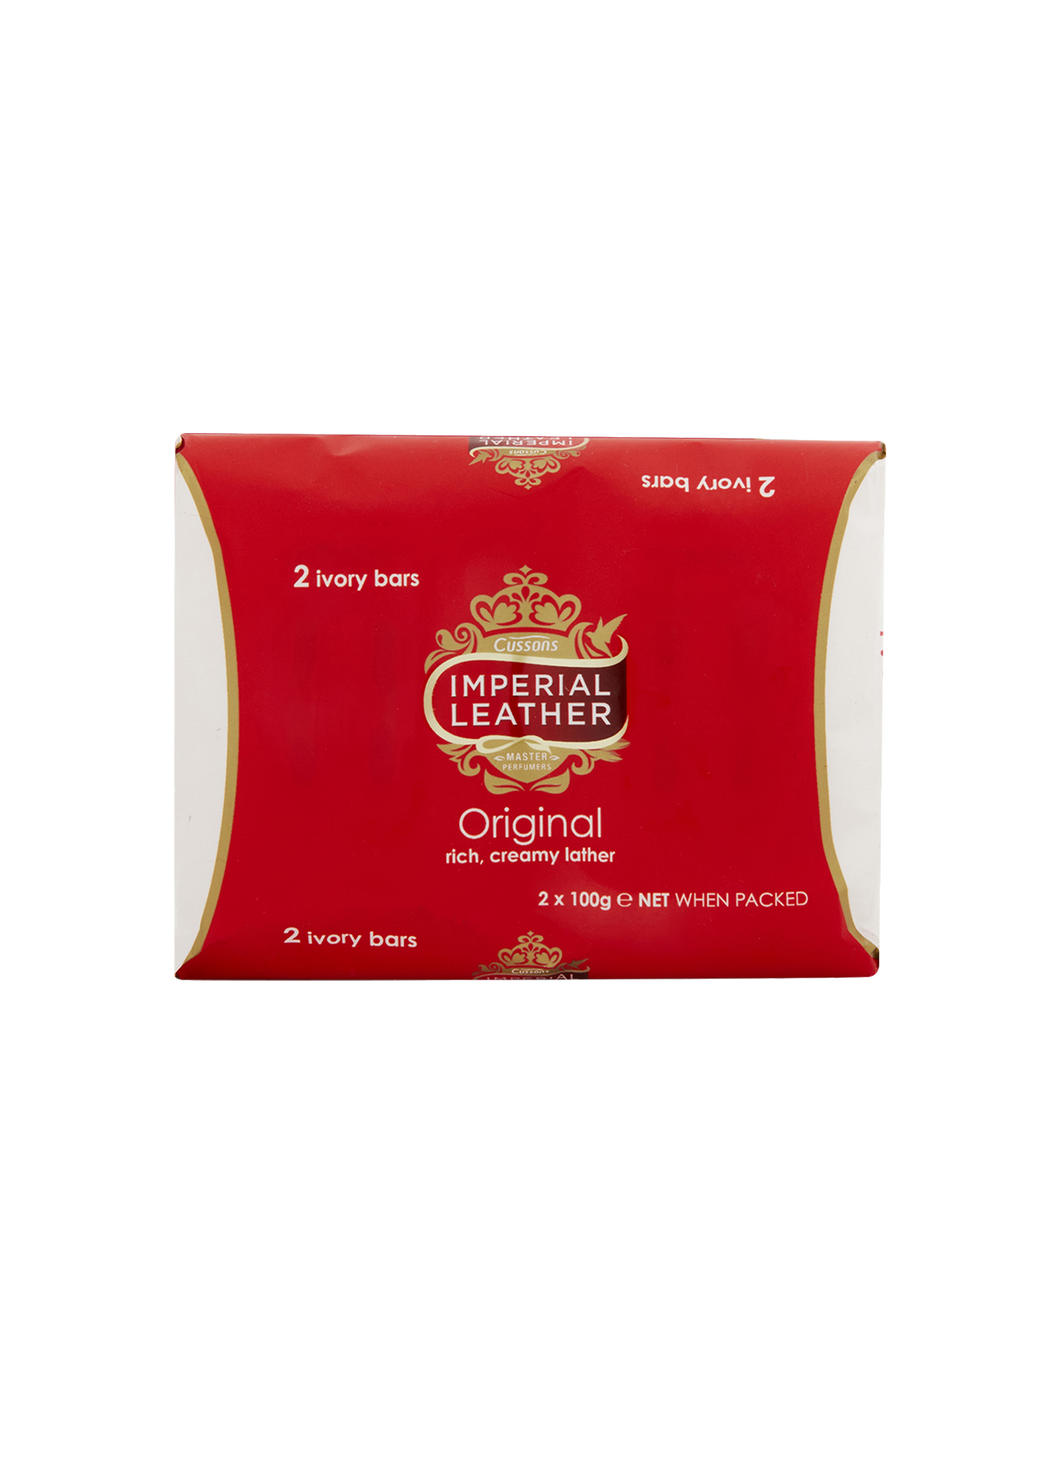 Cussons Imperial Leather Soap Original 2x100g